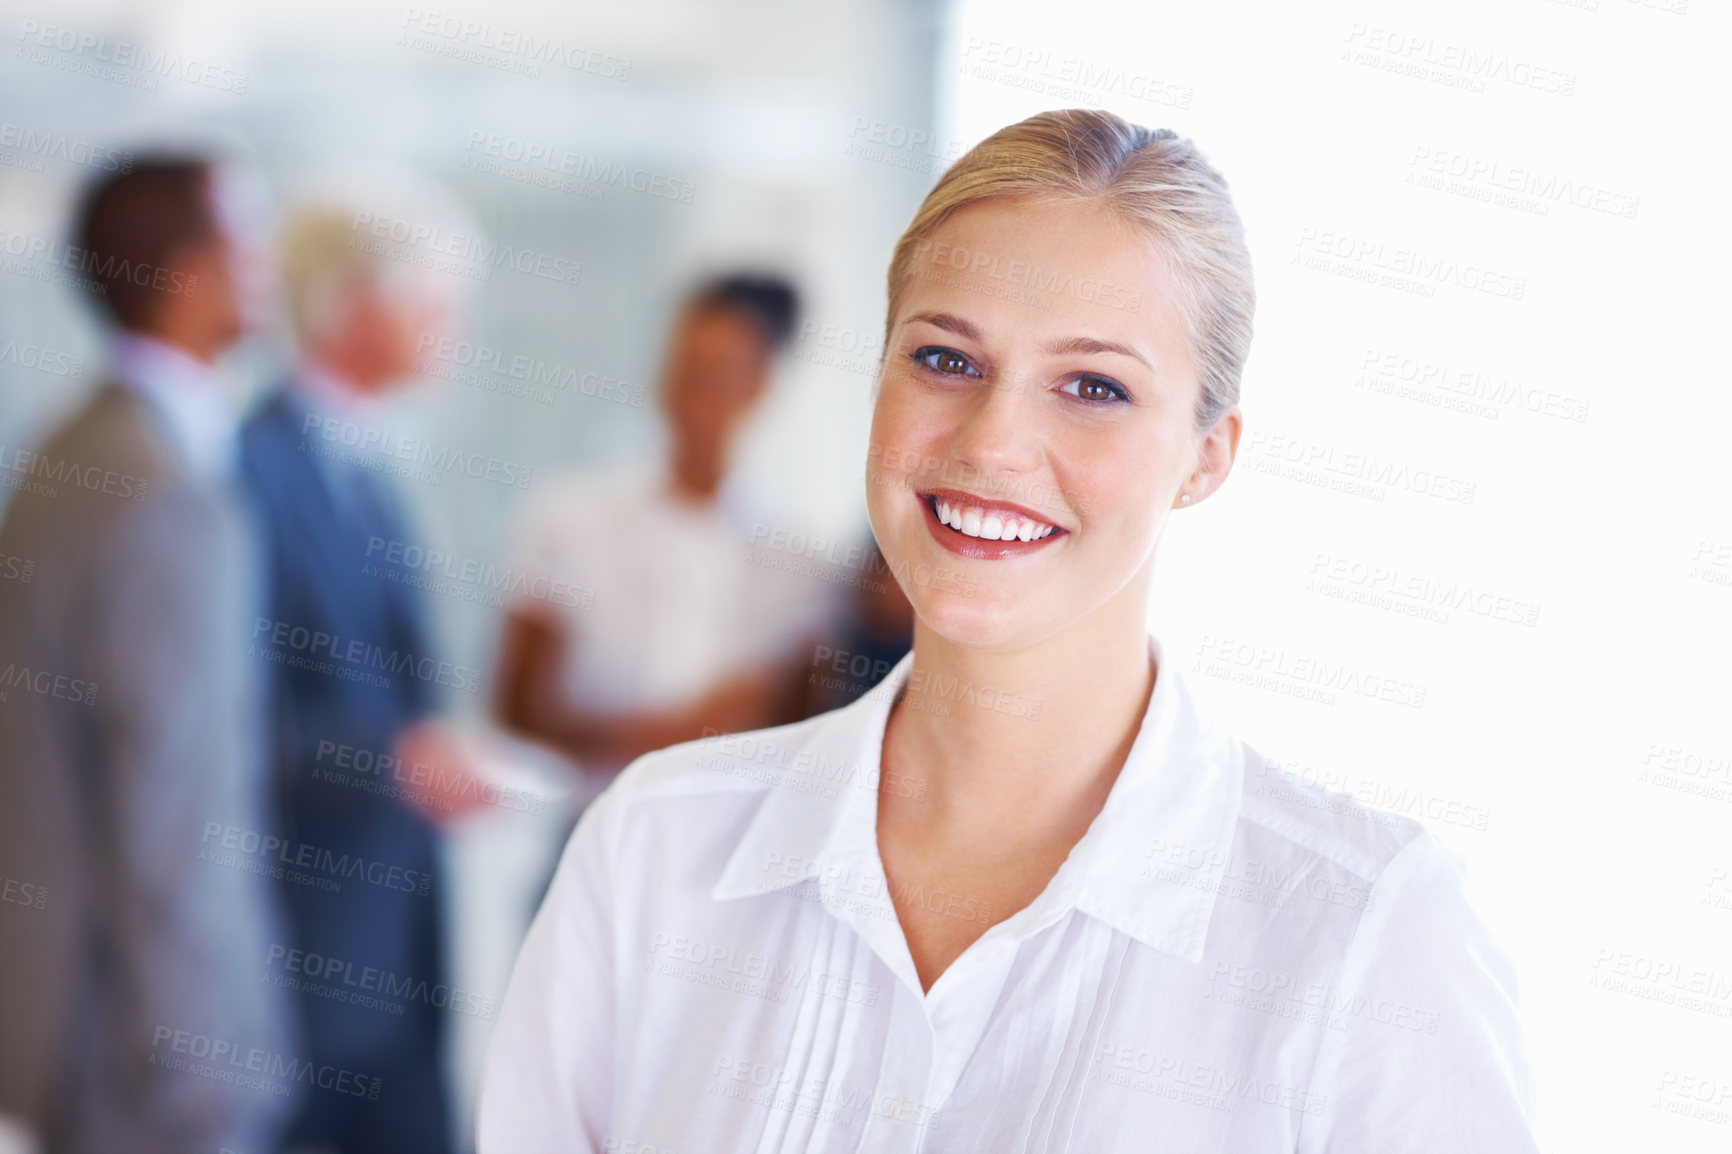 Buy stock photo Portrait of smiling young business woman with executives in background